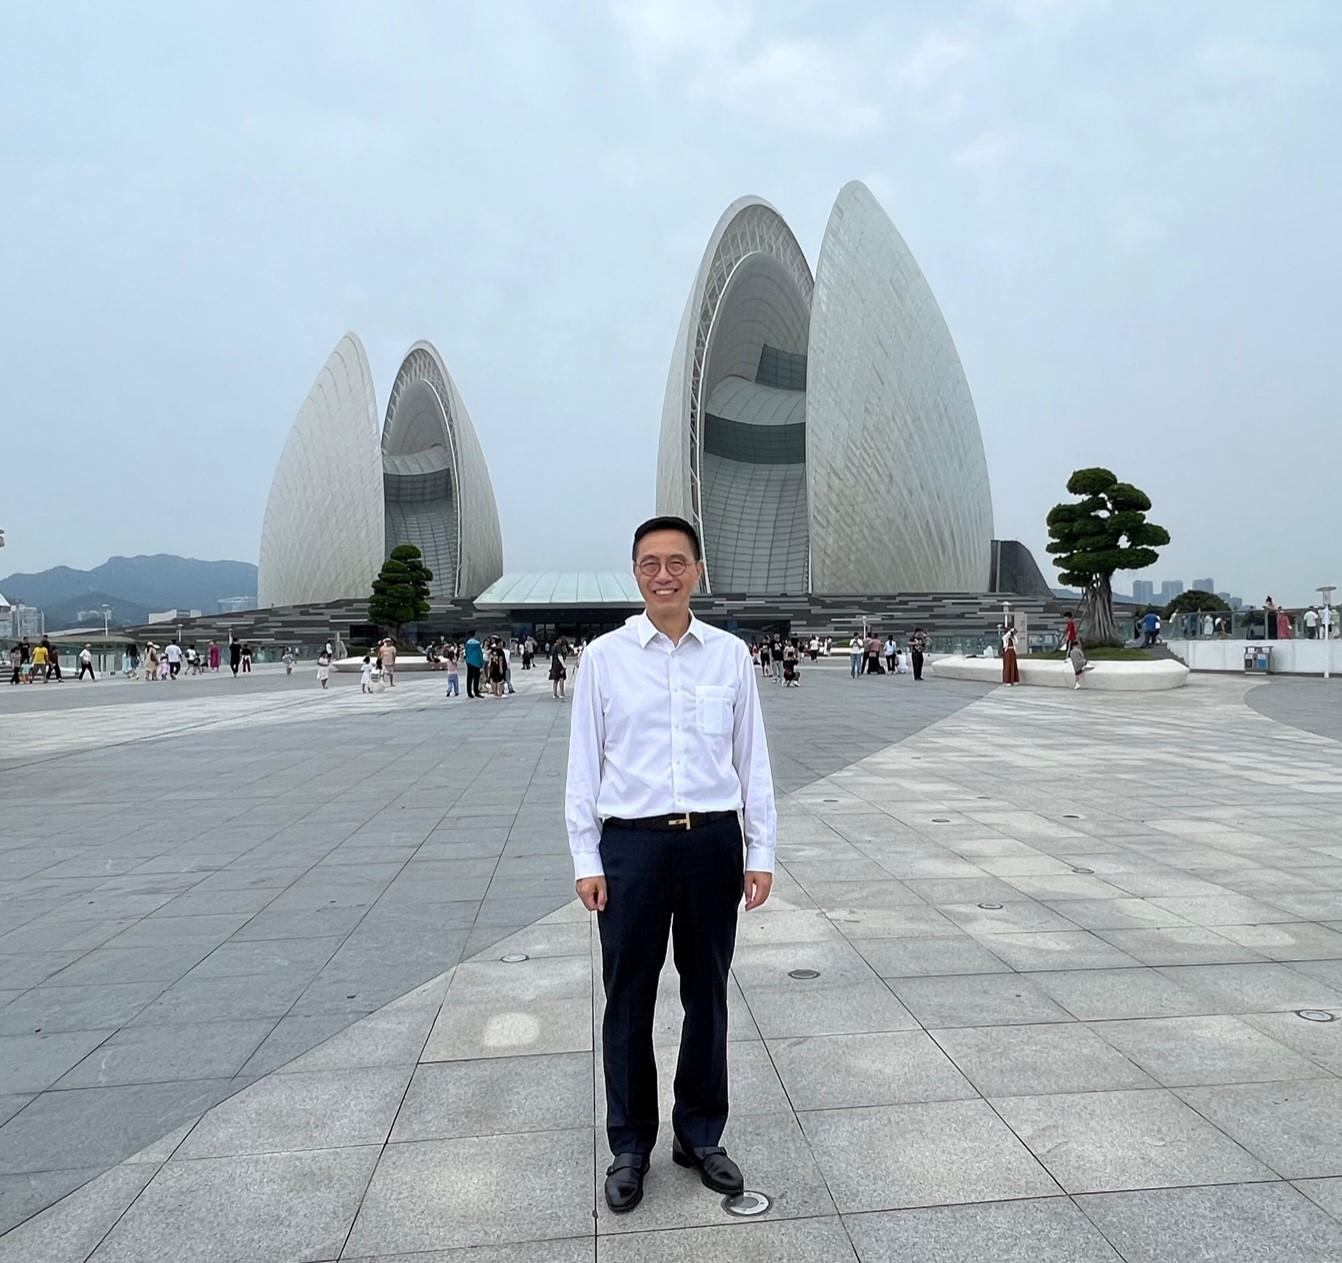 The Secretary for Culture, Sports and Tourism, Mr Kevin Yeung, visited the Zhuhai Grand Theatre in Zhuhai today (August 17) to check on its facilities which accommodate a variety of large-scale integrated performances, as well as learning about its operation and development.